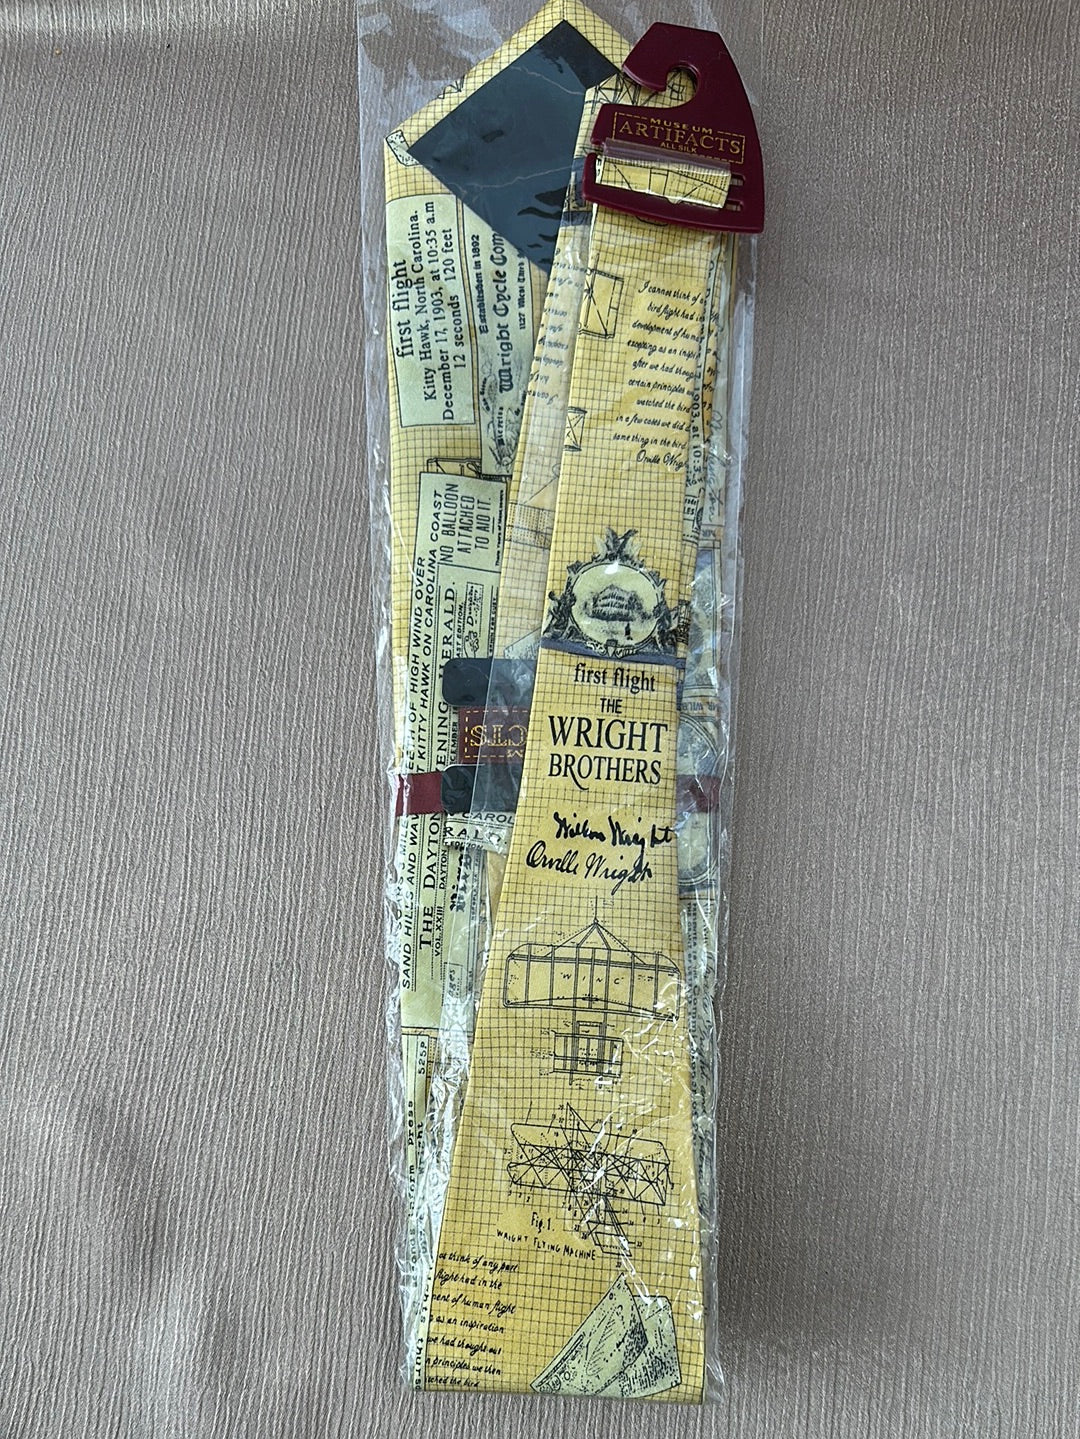 NWT - MUSEUM ARTIFACTS yellow blue Silk Wright Brothers Kitty Hawk Necktie